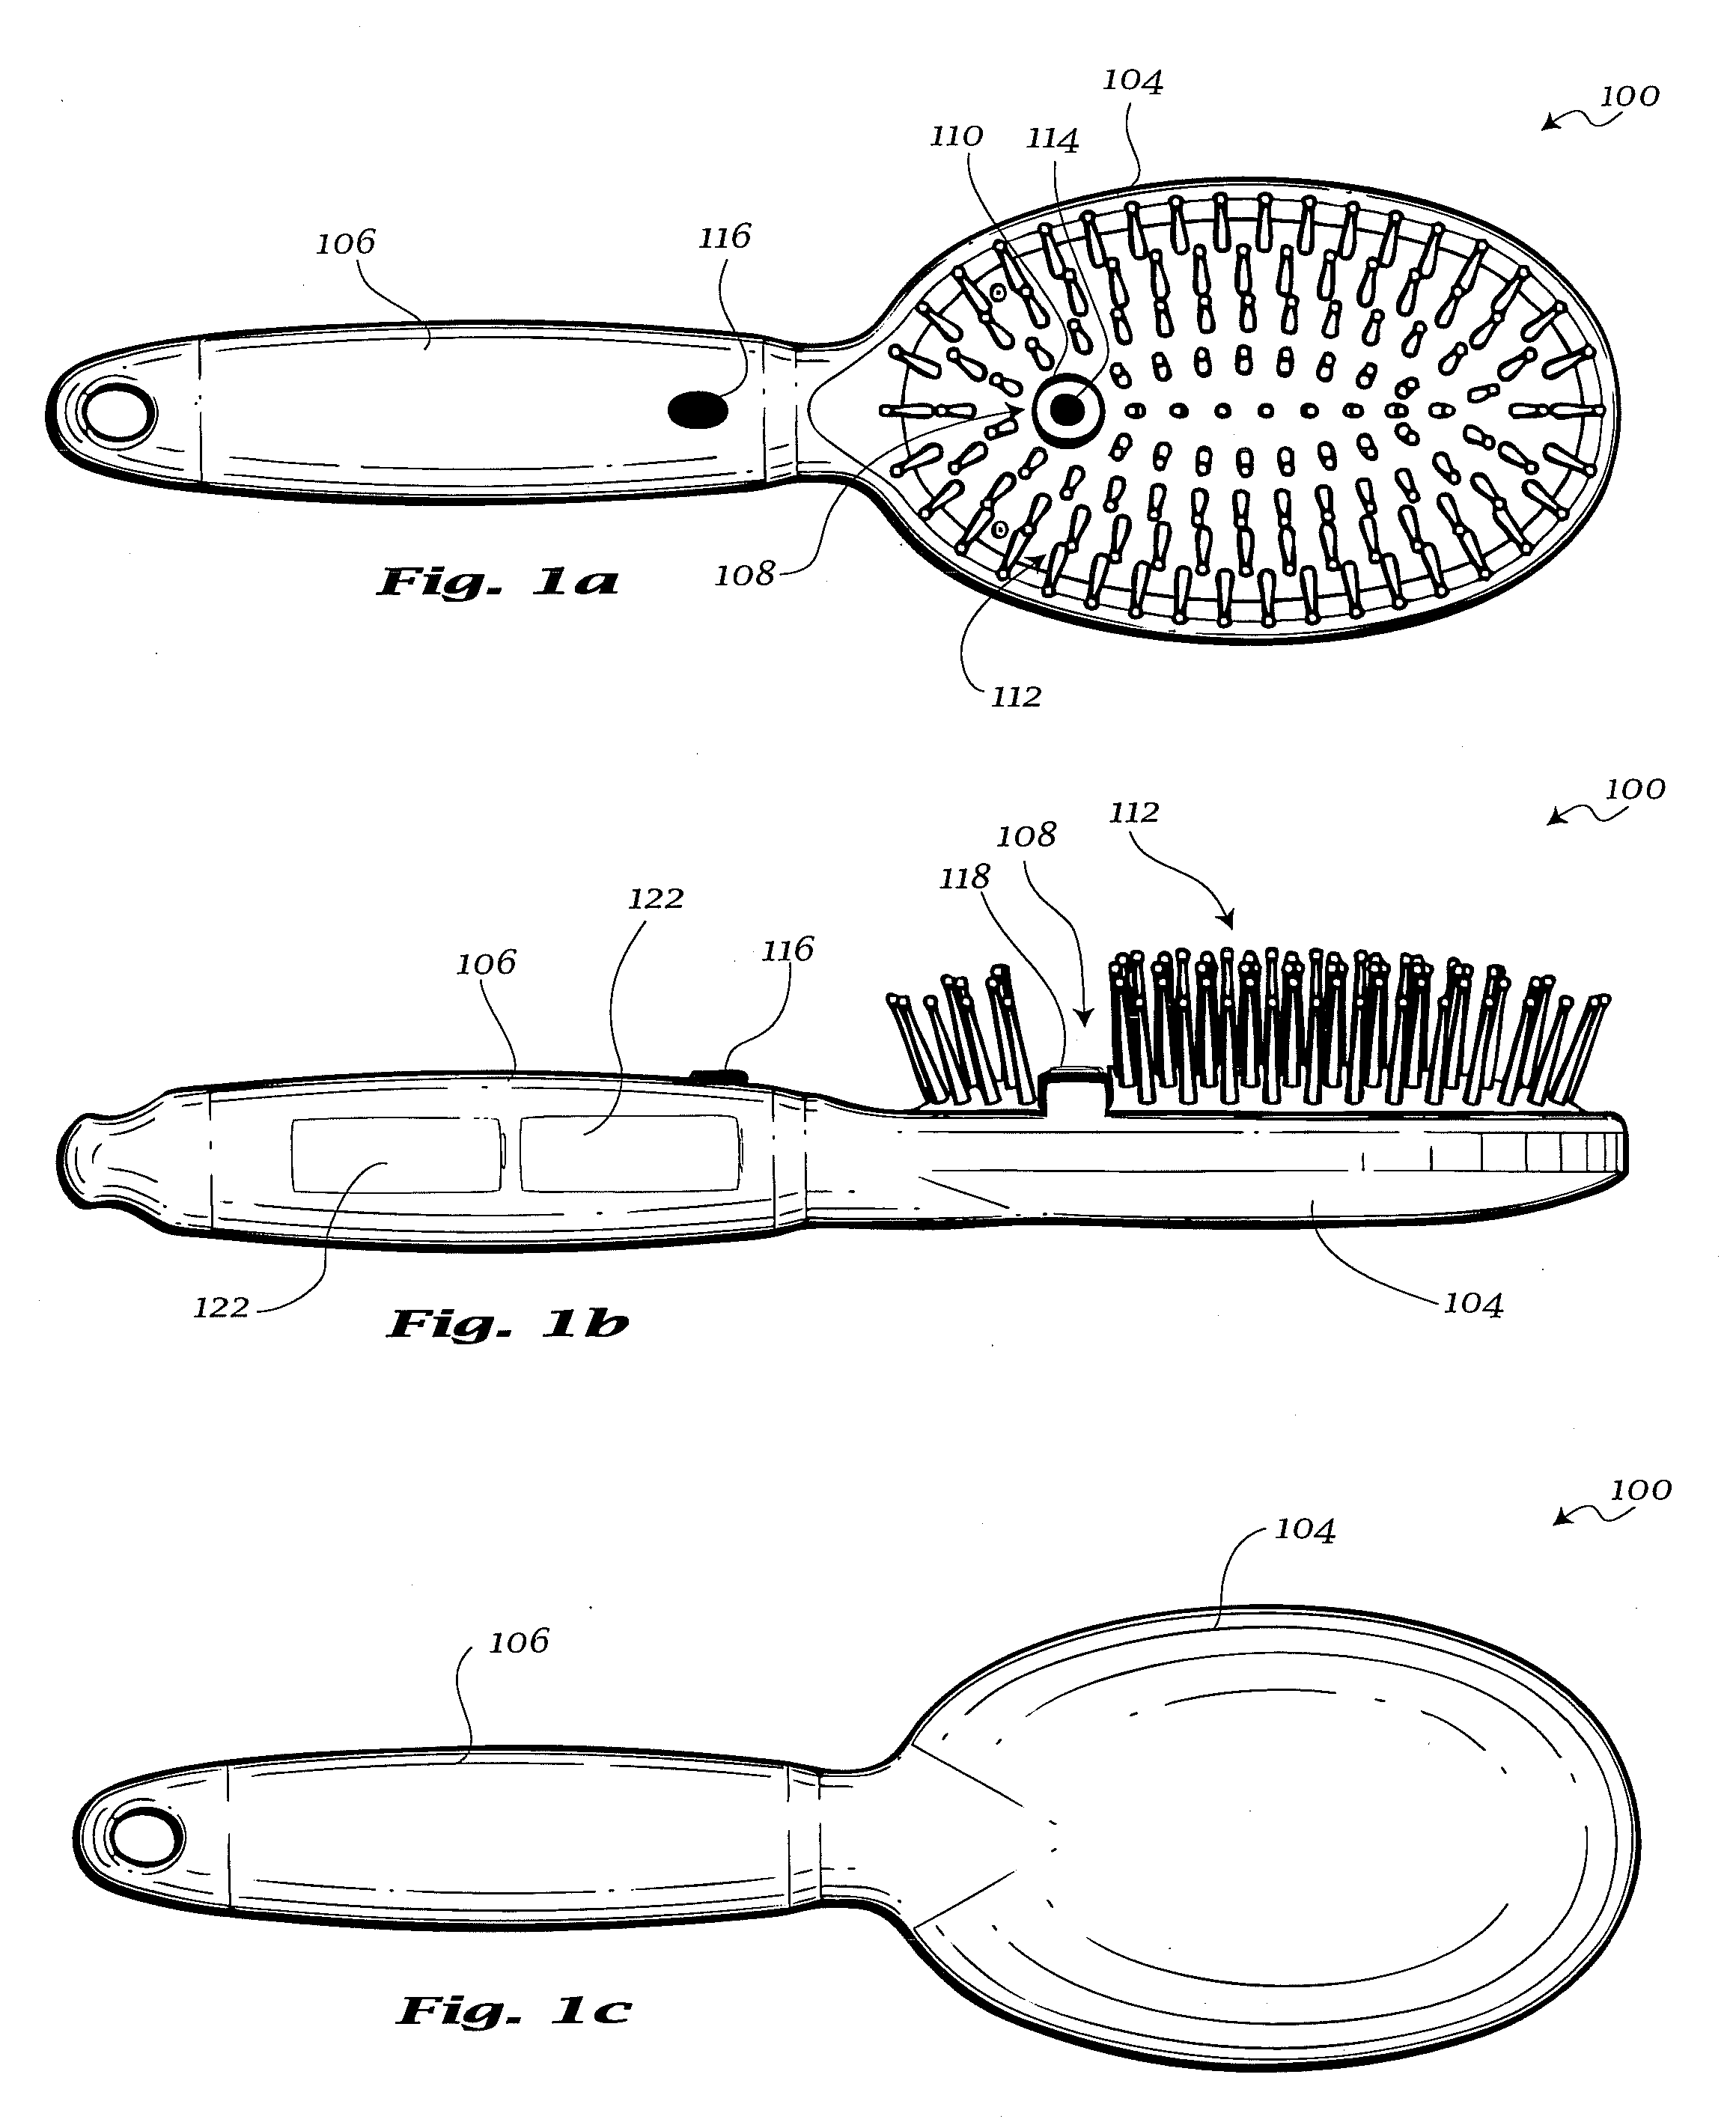 Hair styling system and apparatus